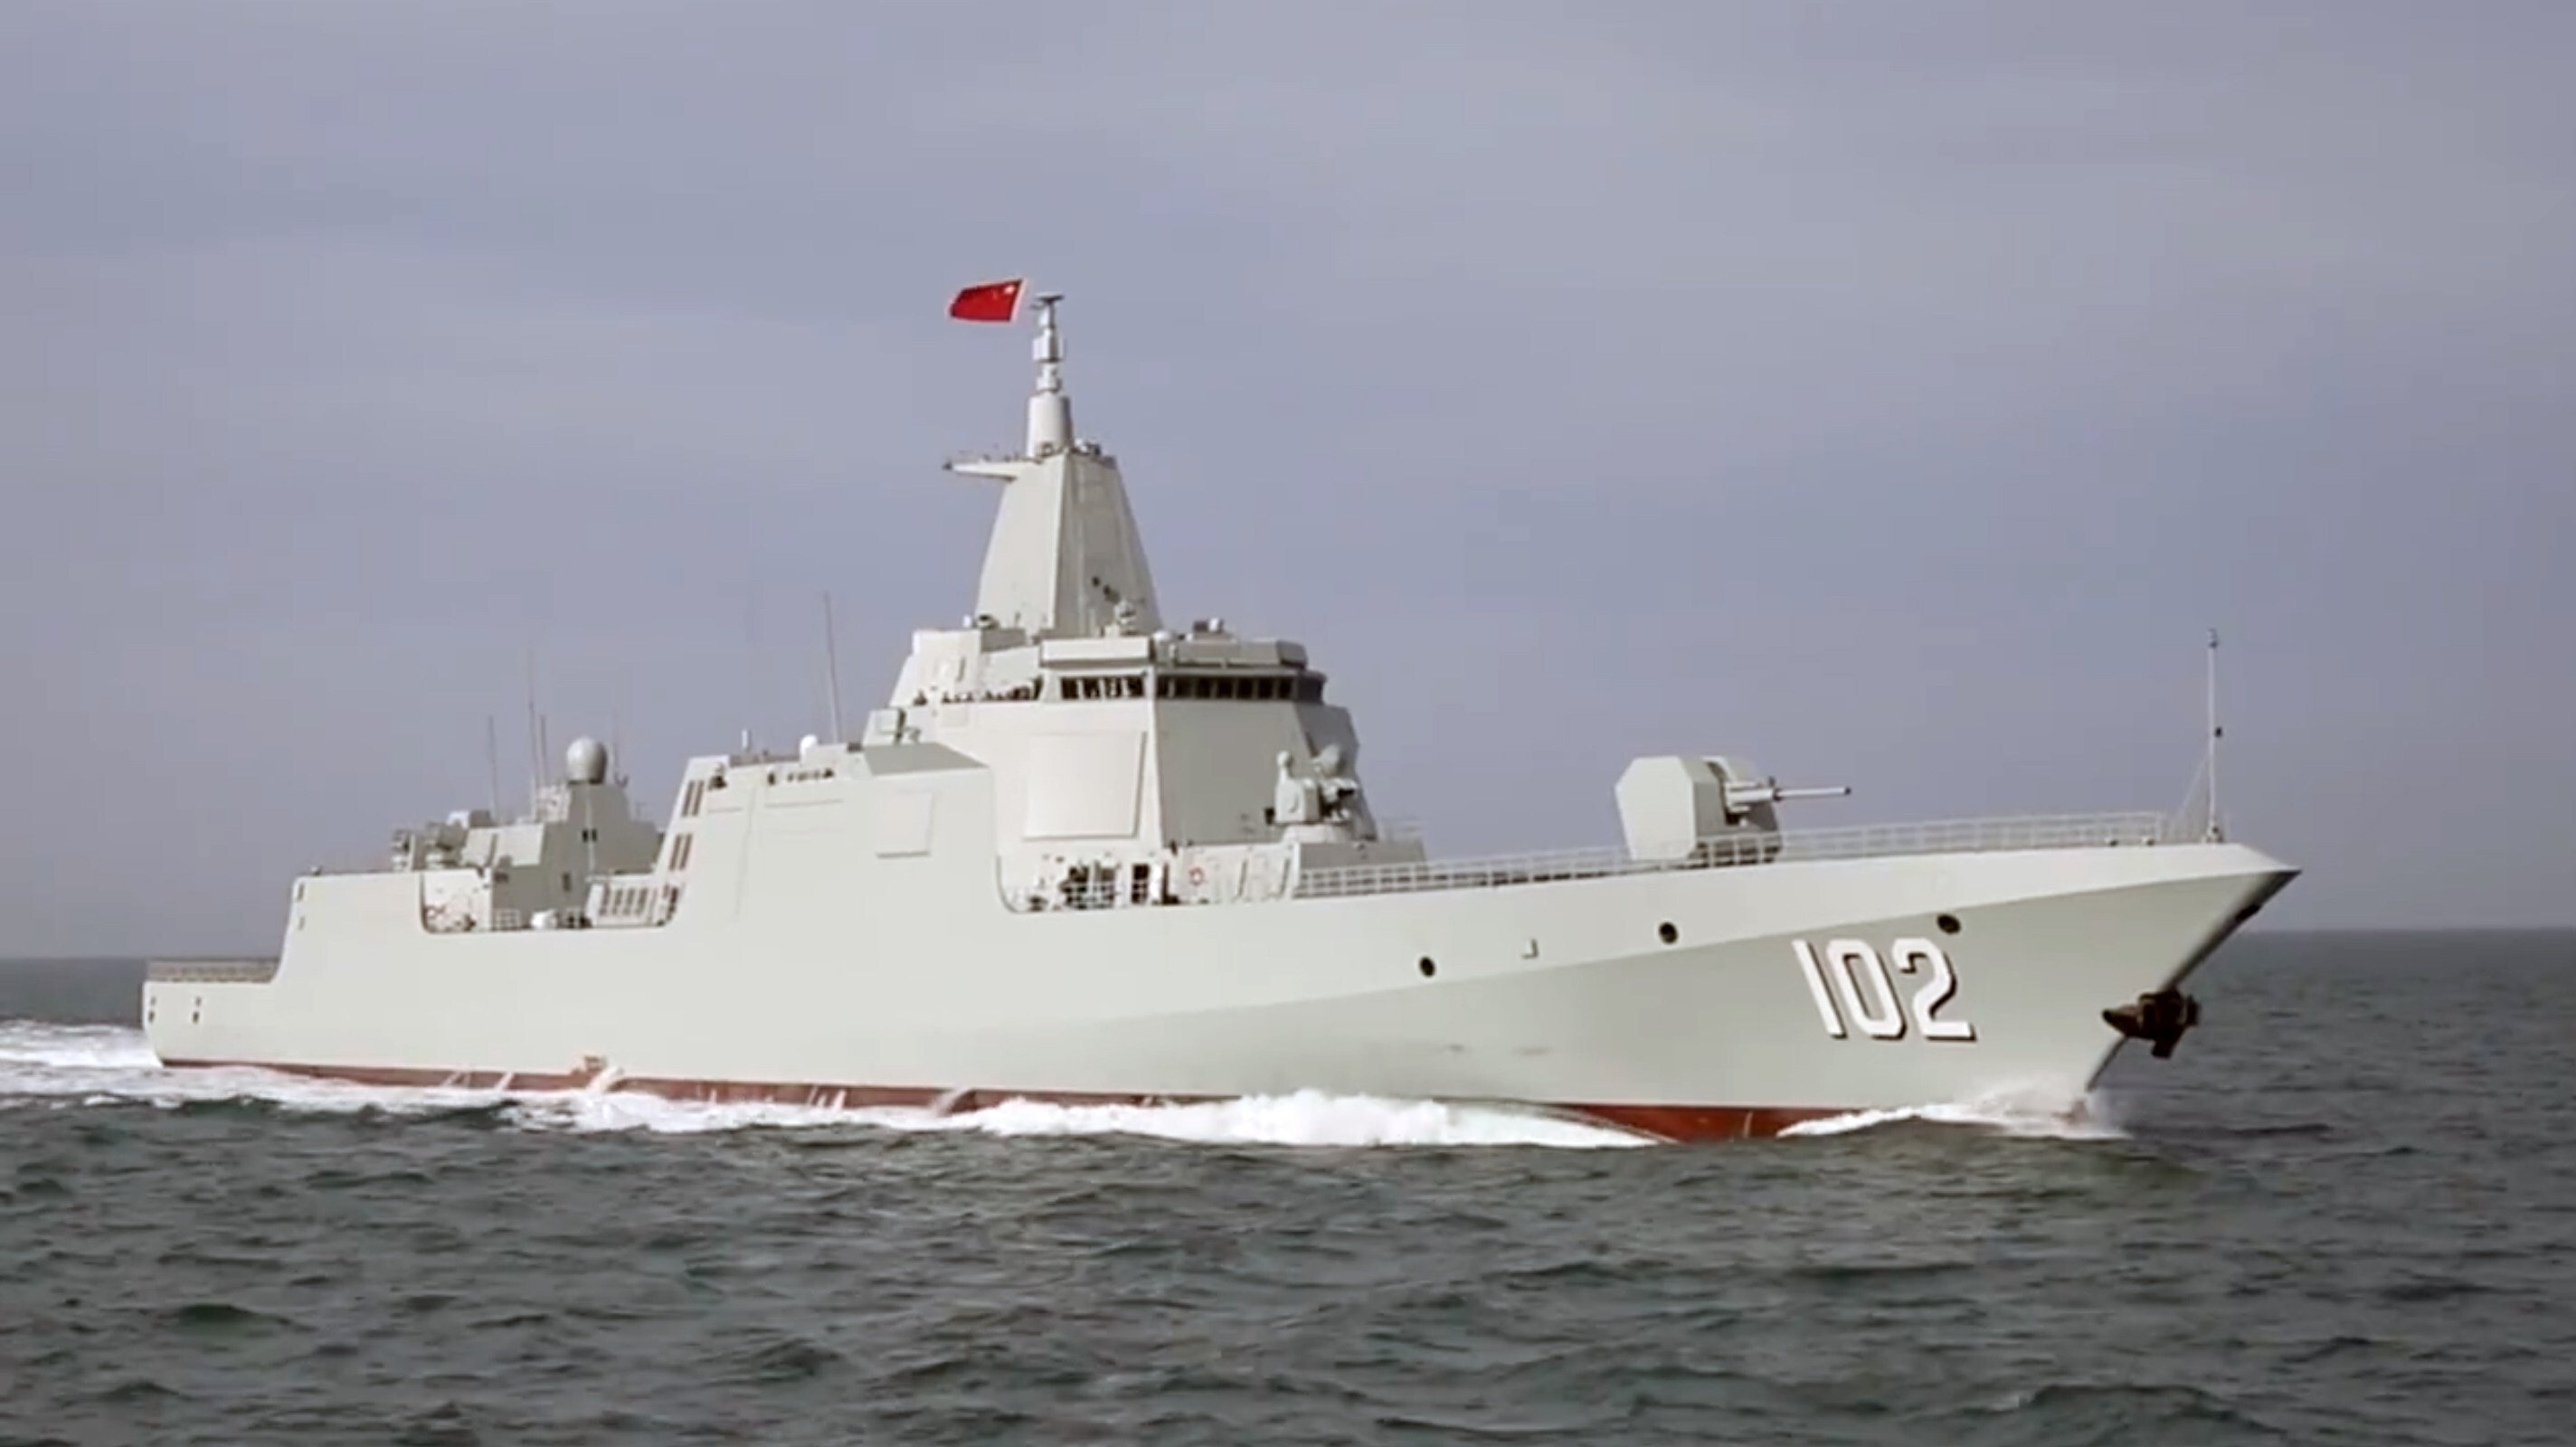 The Lhasa, the second Type 055 destroyer to enter service with the PLA. Photo: Handout
